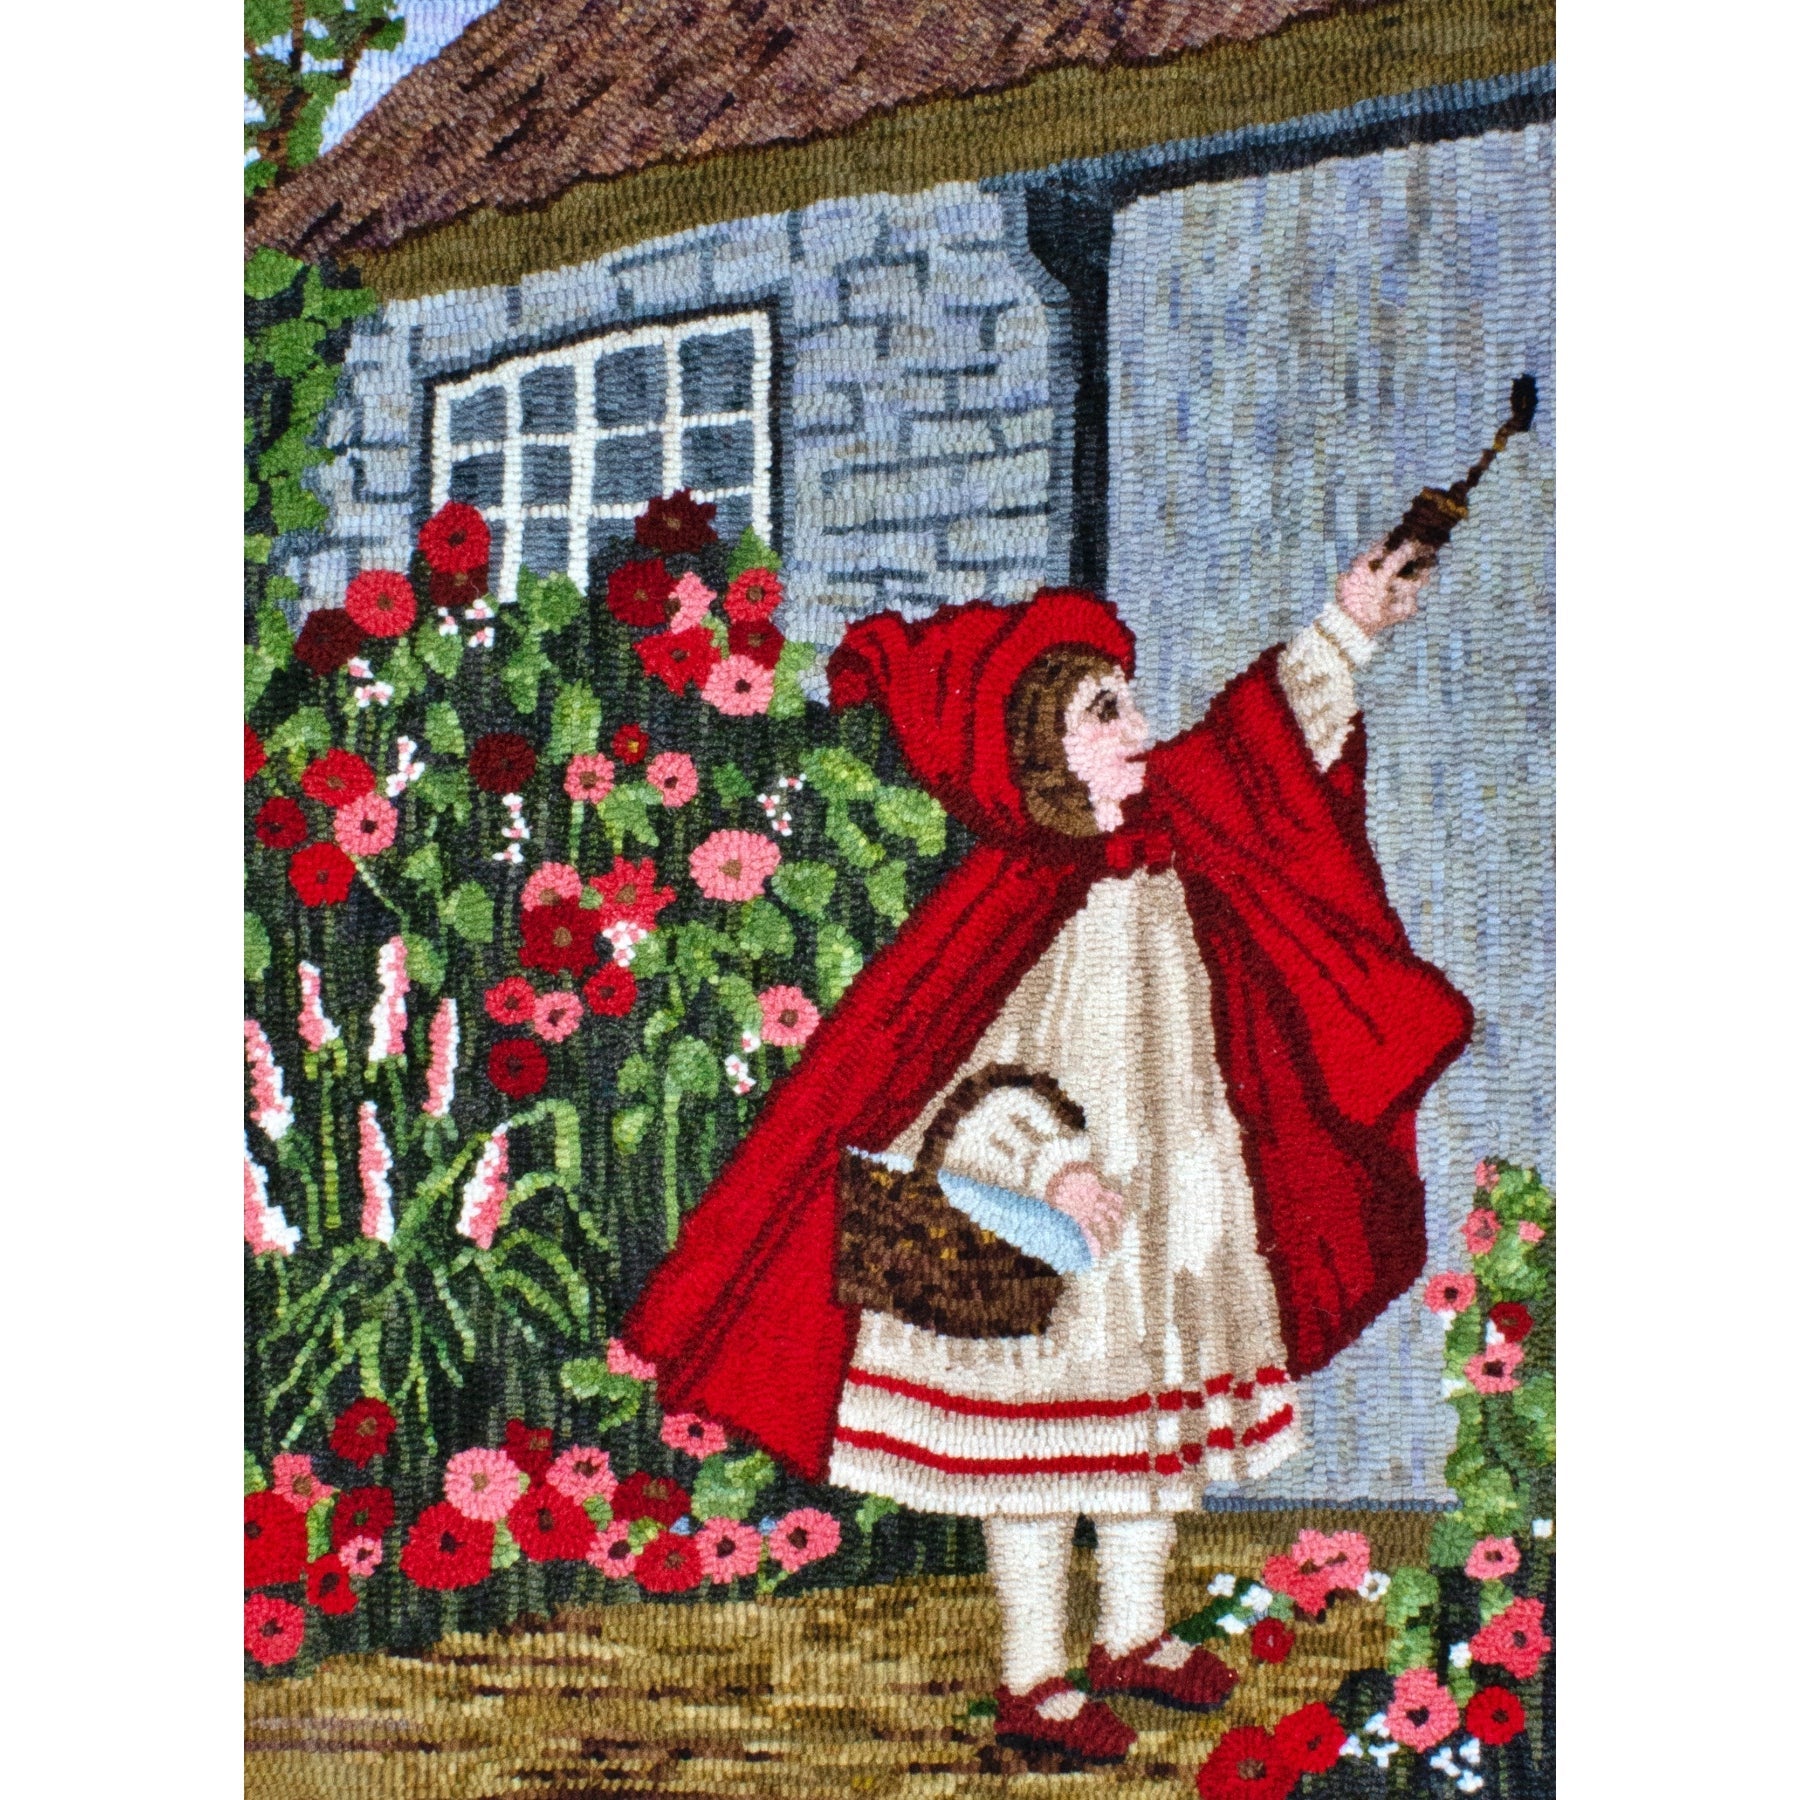 Red Riding Hood, ill. Otto Kubel, 1910, rug hooked by Libbey Lundgren